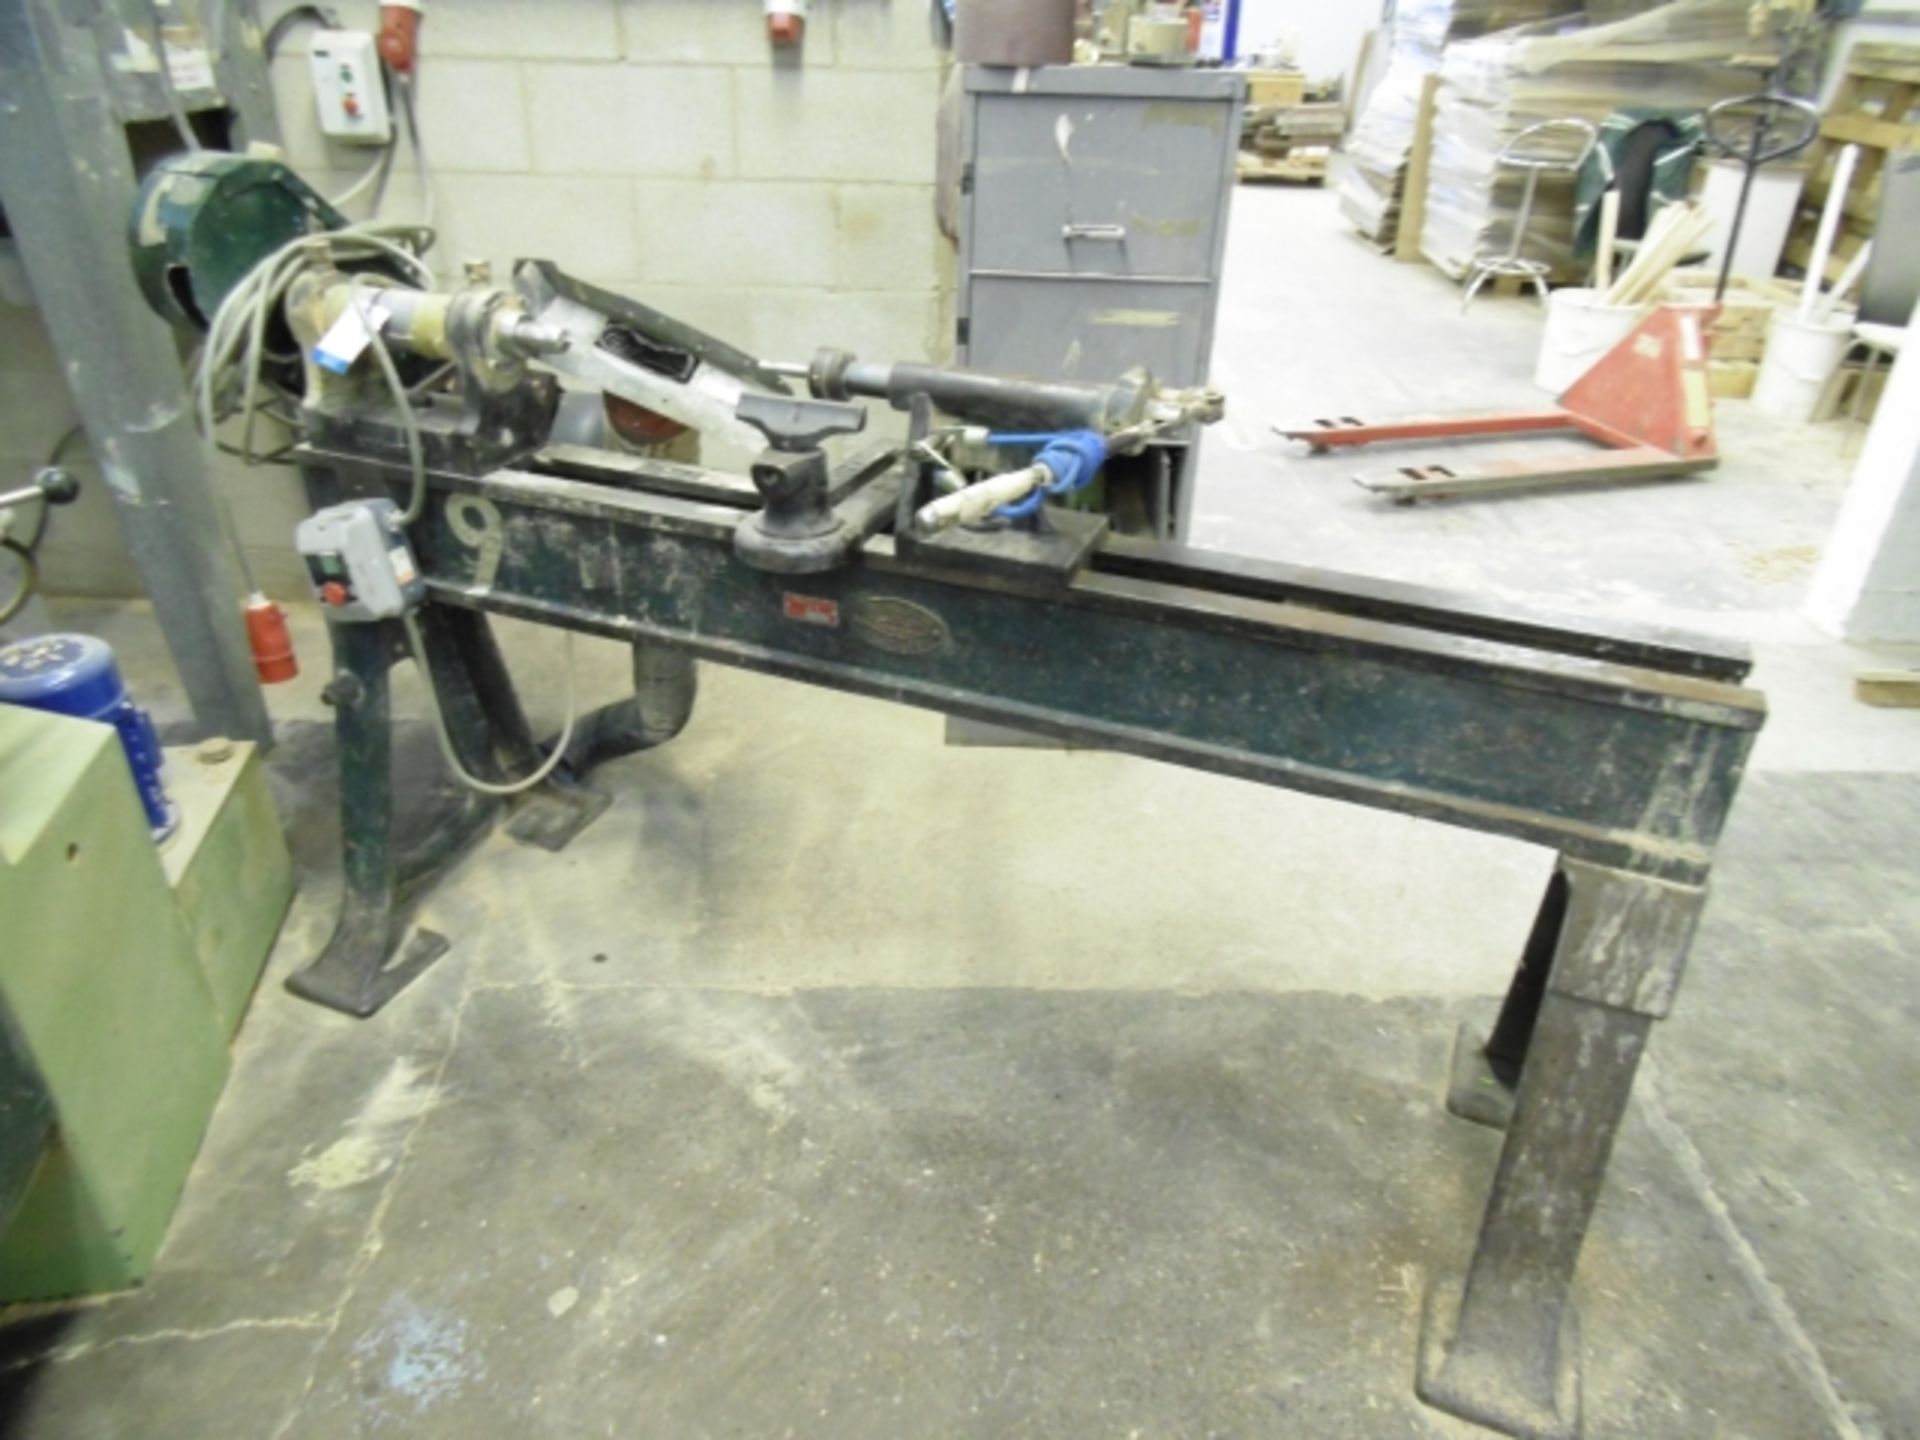 * Kirchener & Co Woodturning Lathe; 3 phase. Please note there is a £10 Lift Out Fee on this lot.